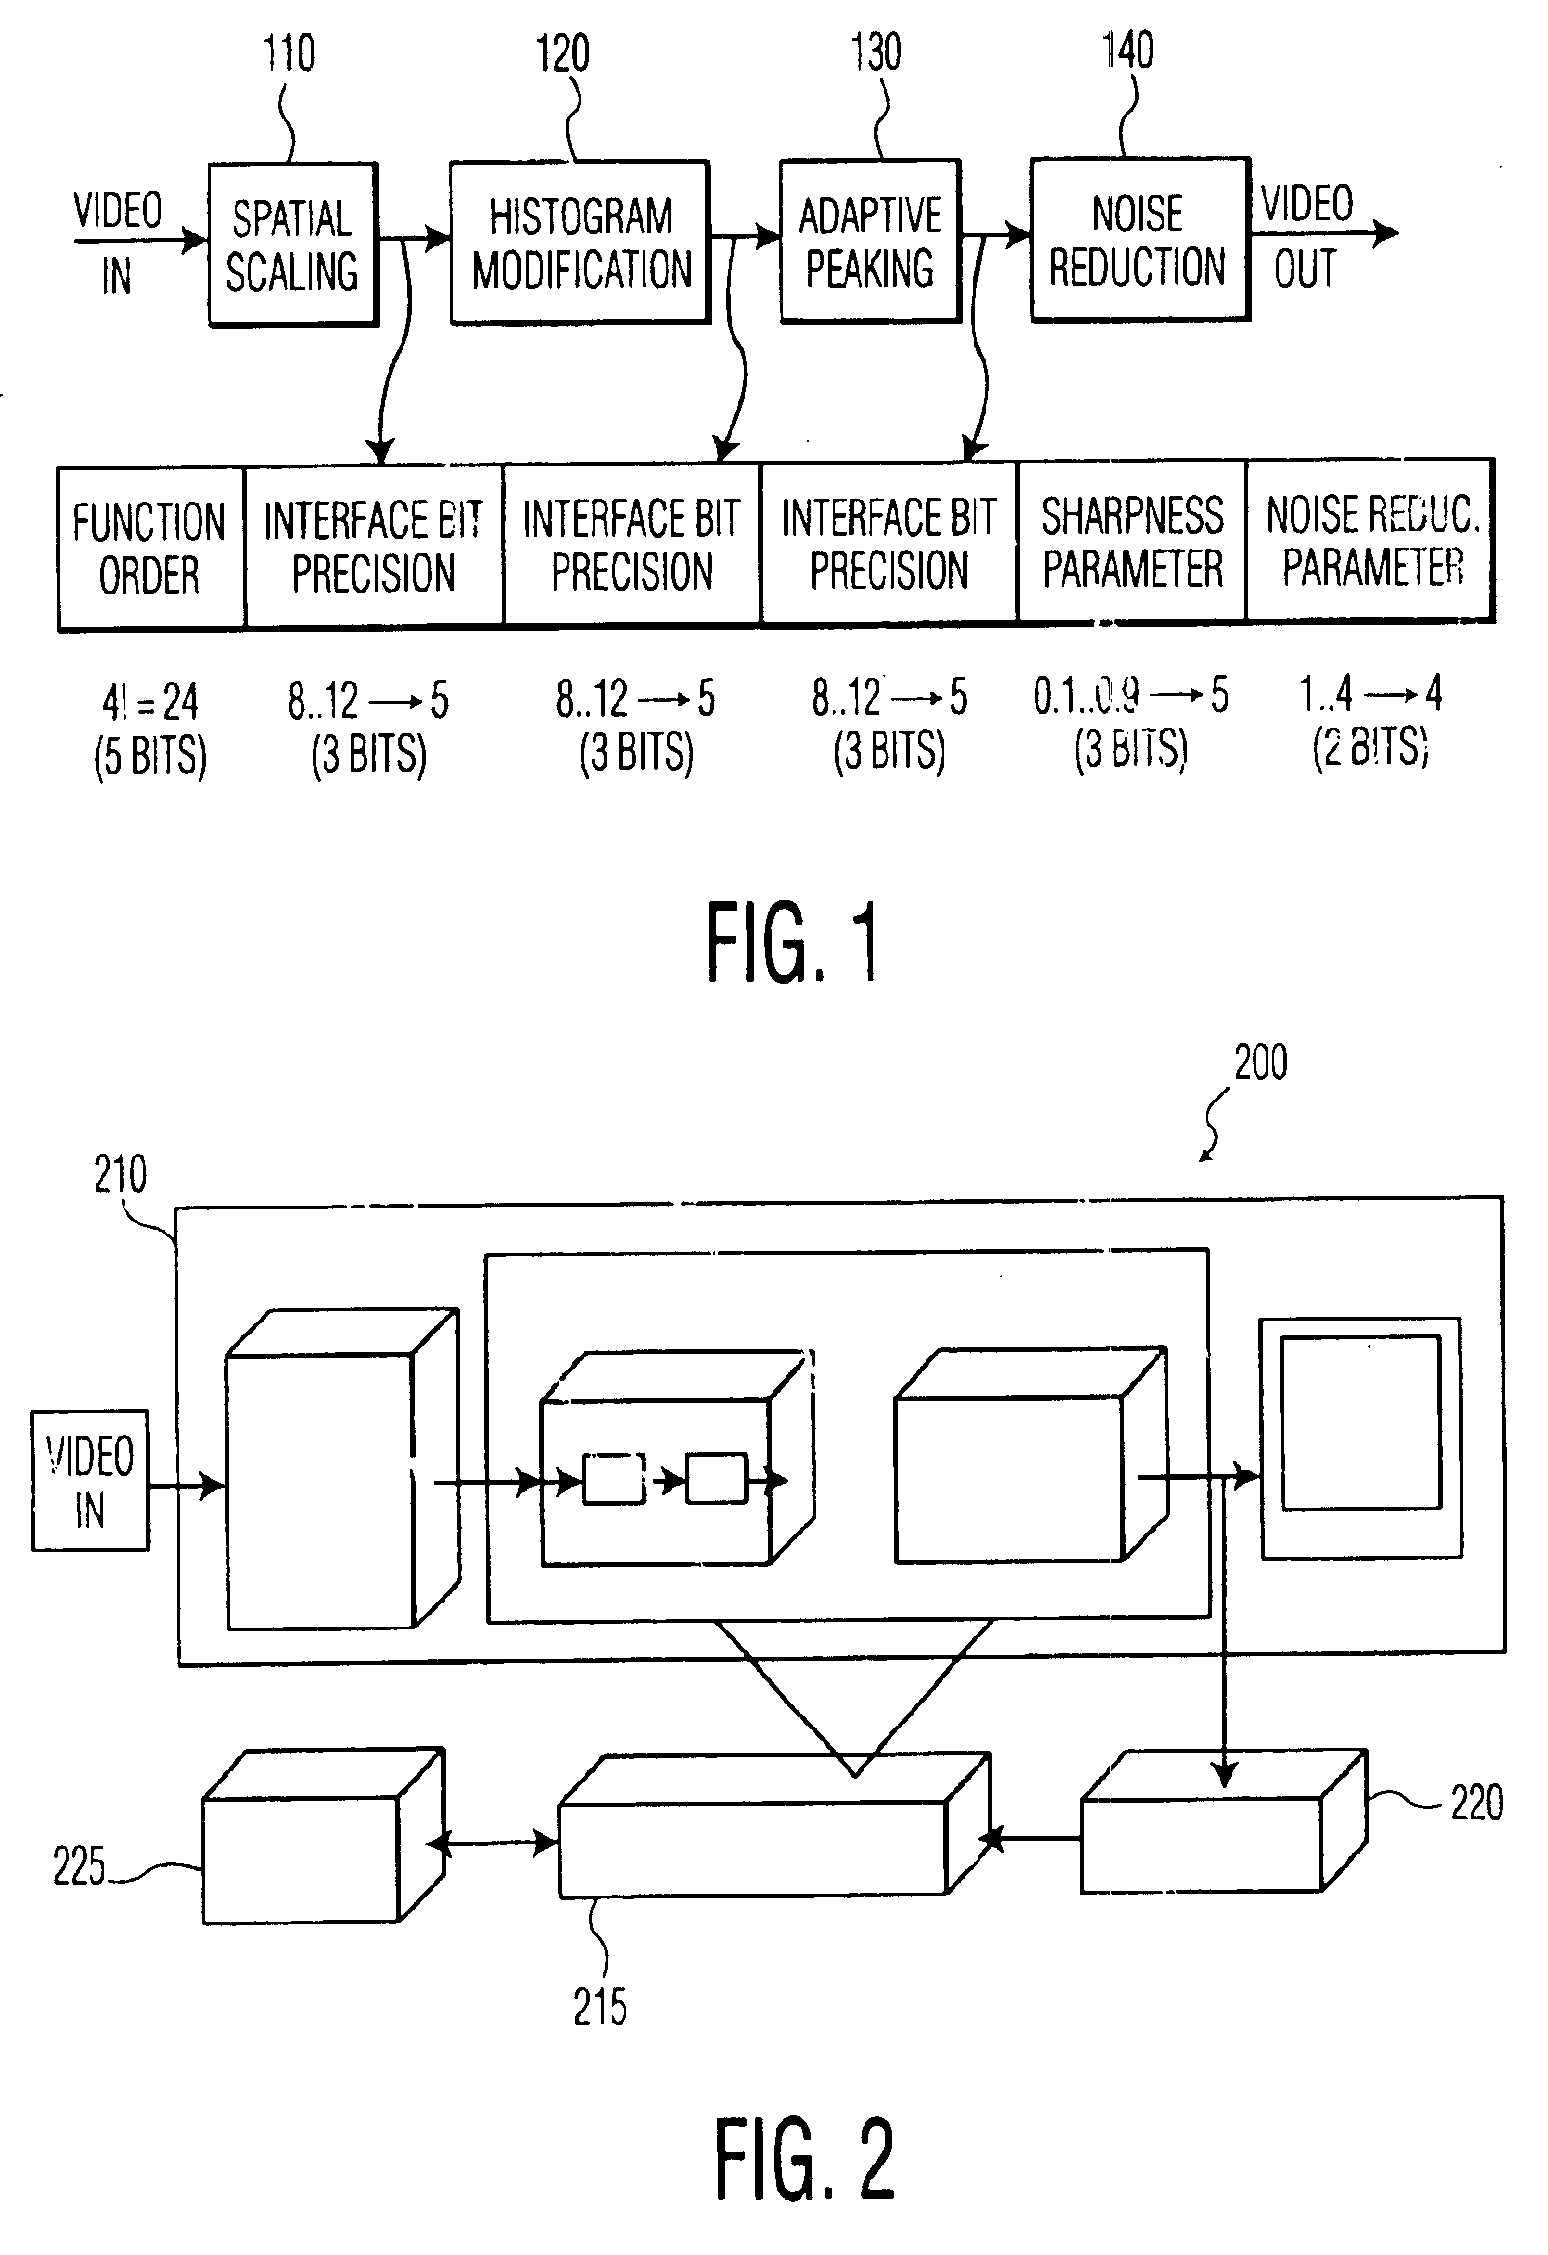 Method and an apparatus to speed the video system optimization using genetic algorithms and memory storage